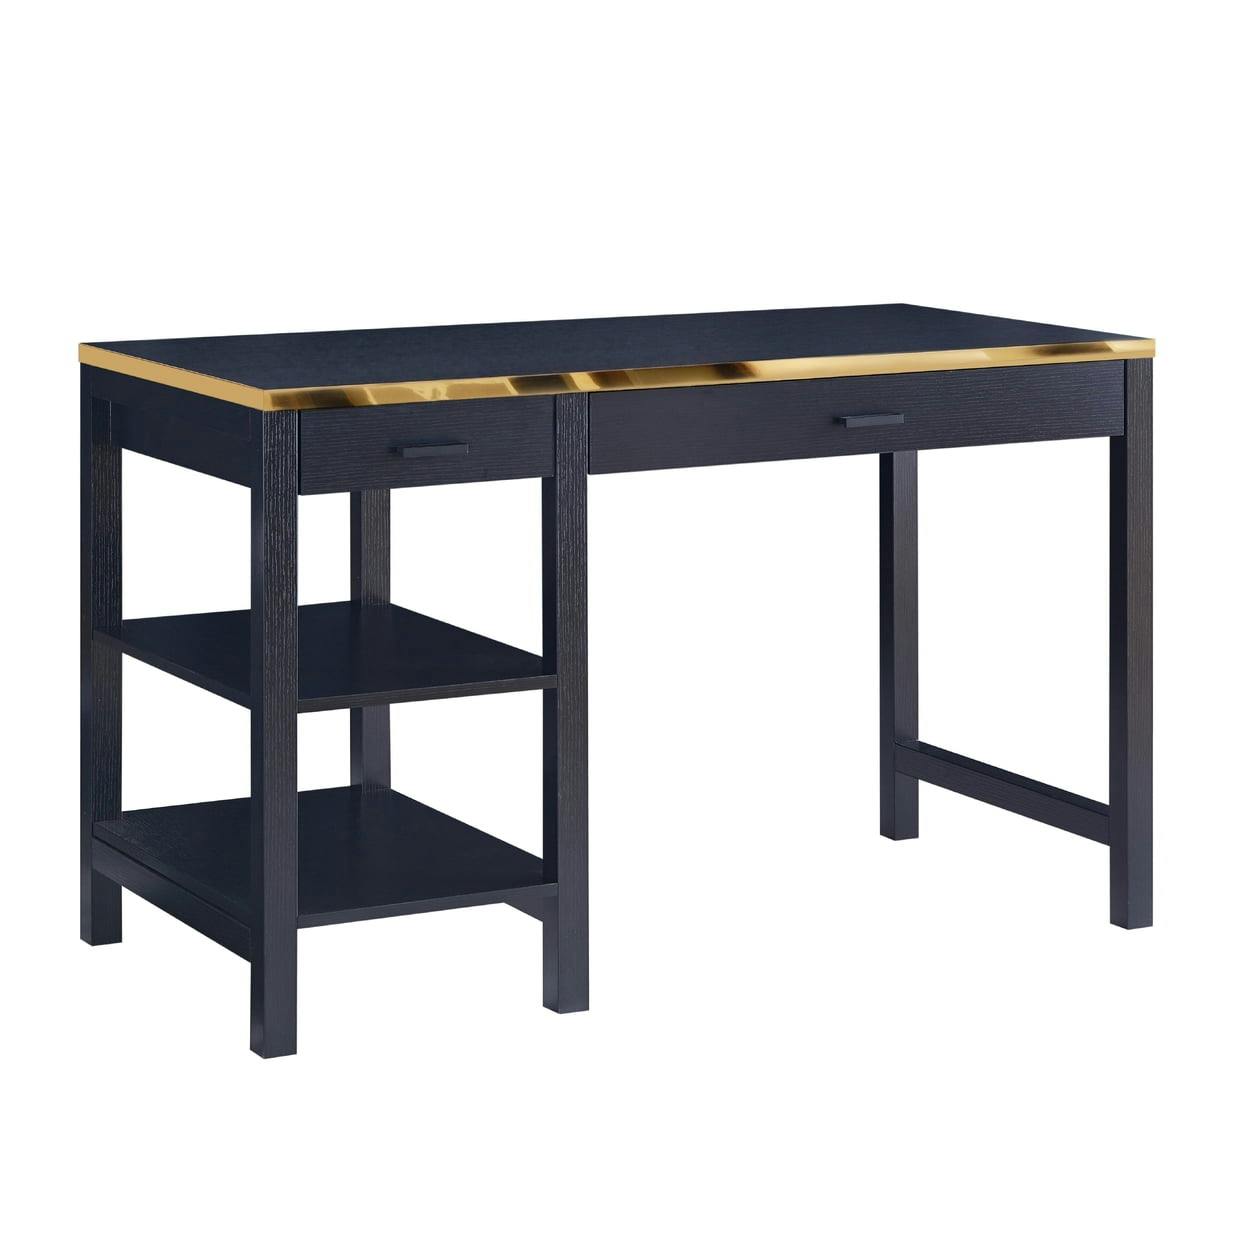 Sophisticated Black Wooden Desk with Gold Accents and Storage